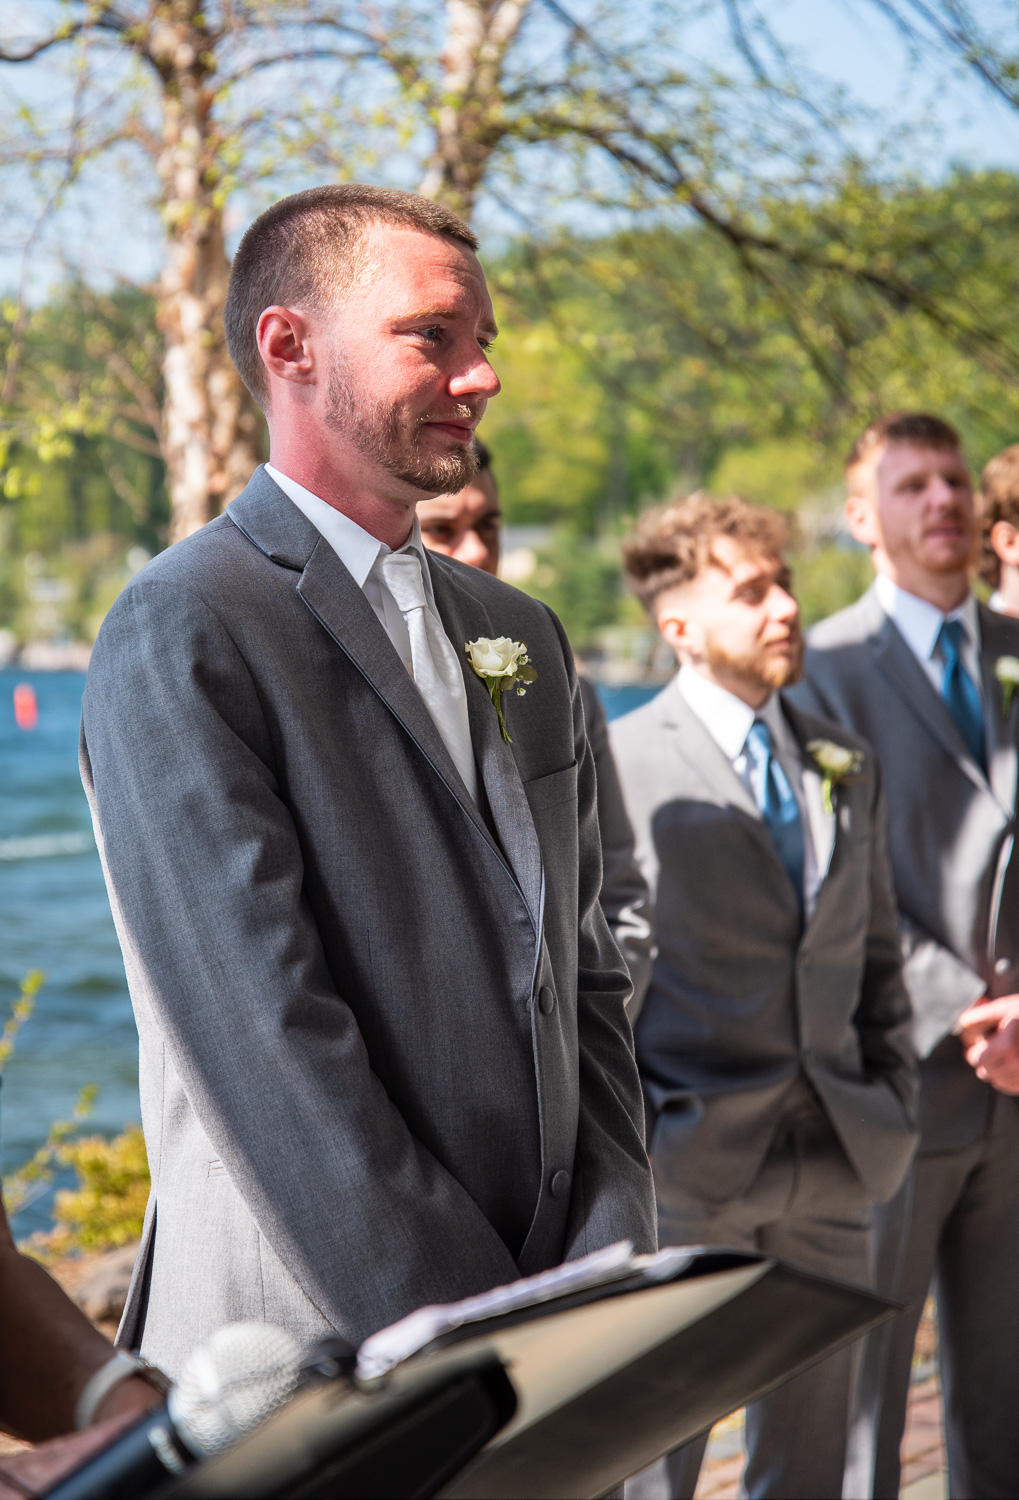 Groom seeing bride walking down the aisle for the first time